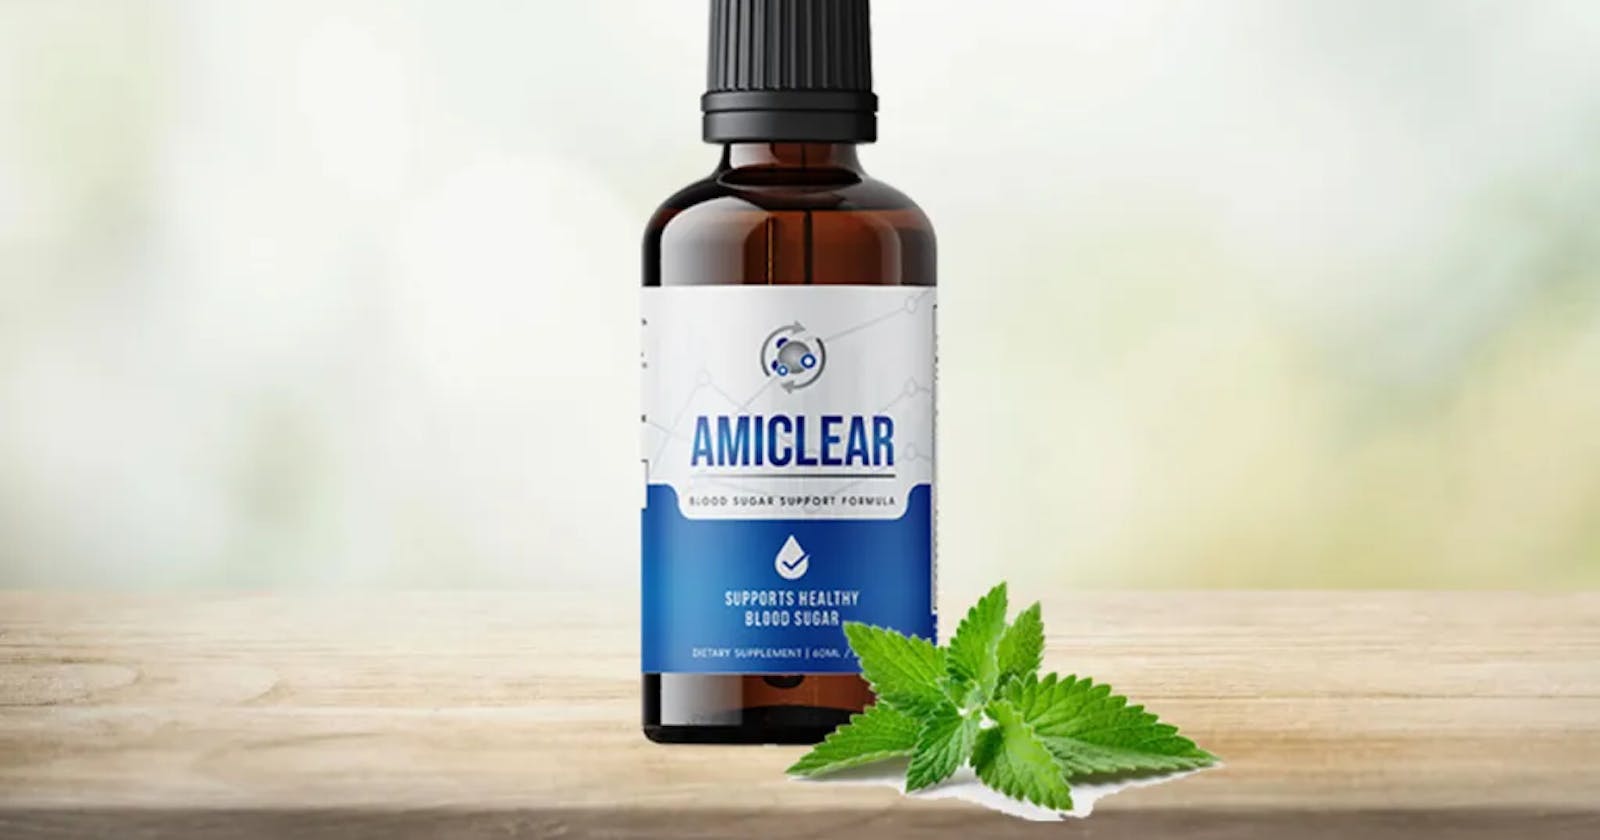 Amiclear Reviews - What to Know Before Buy!